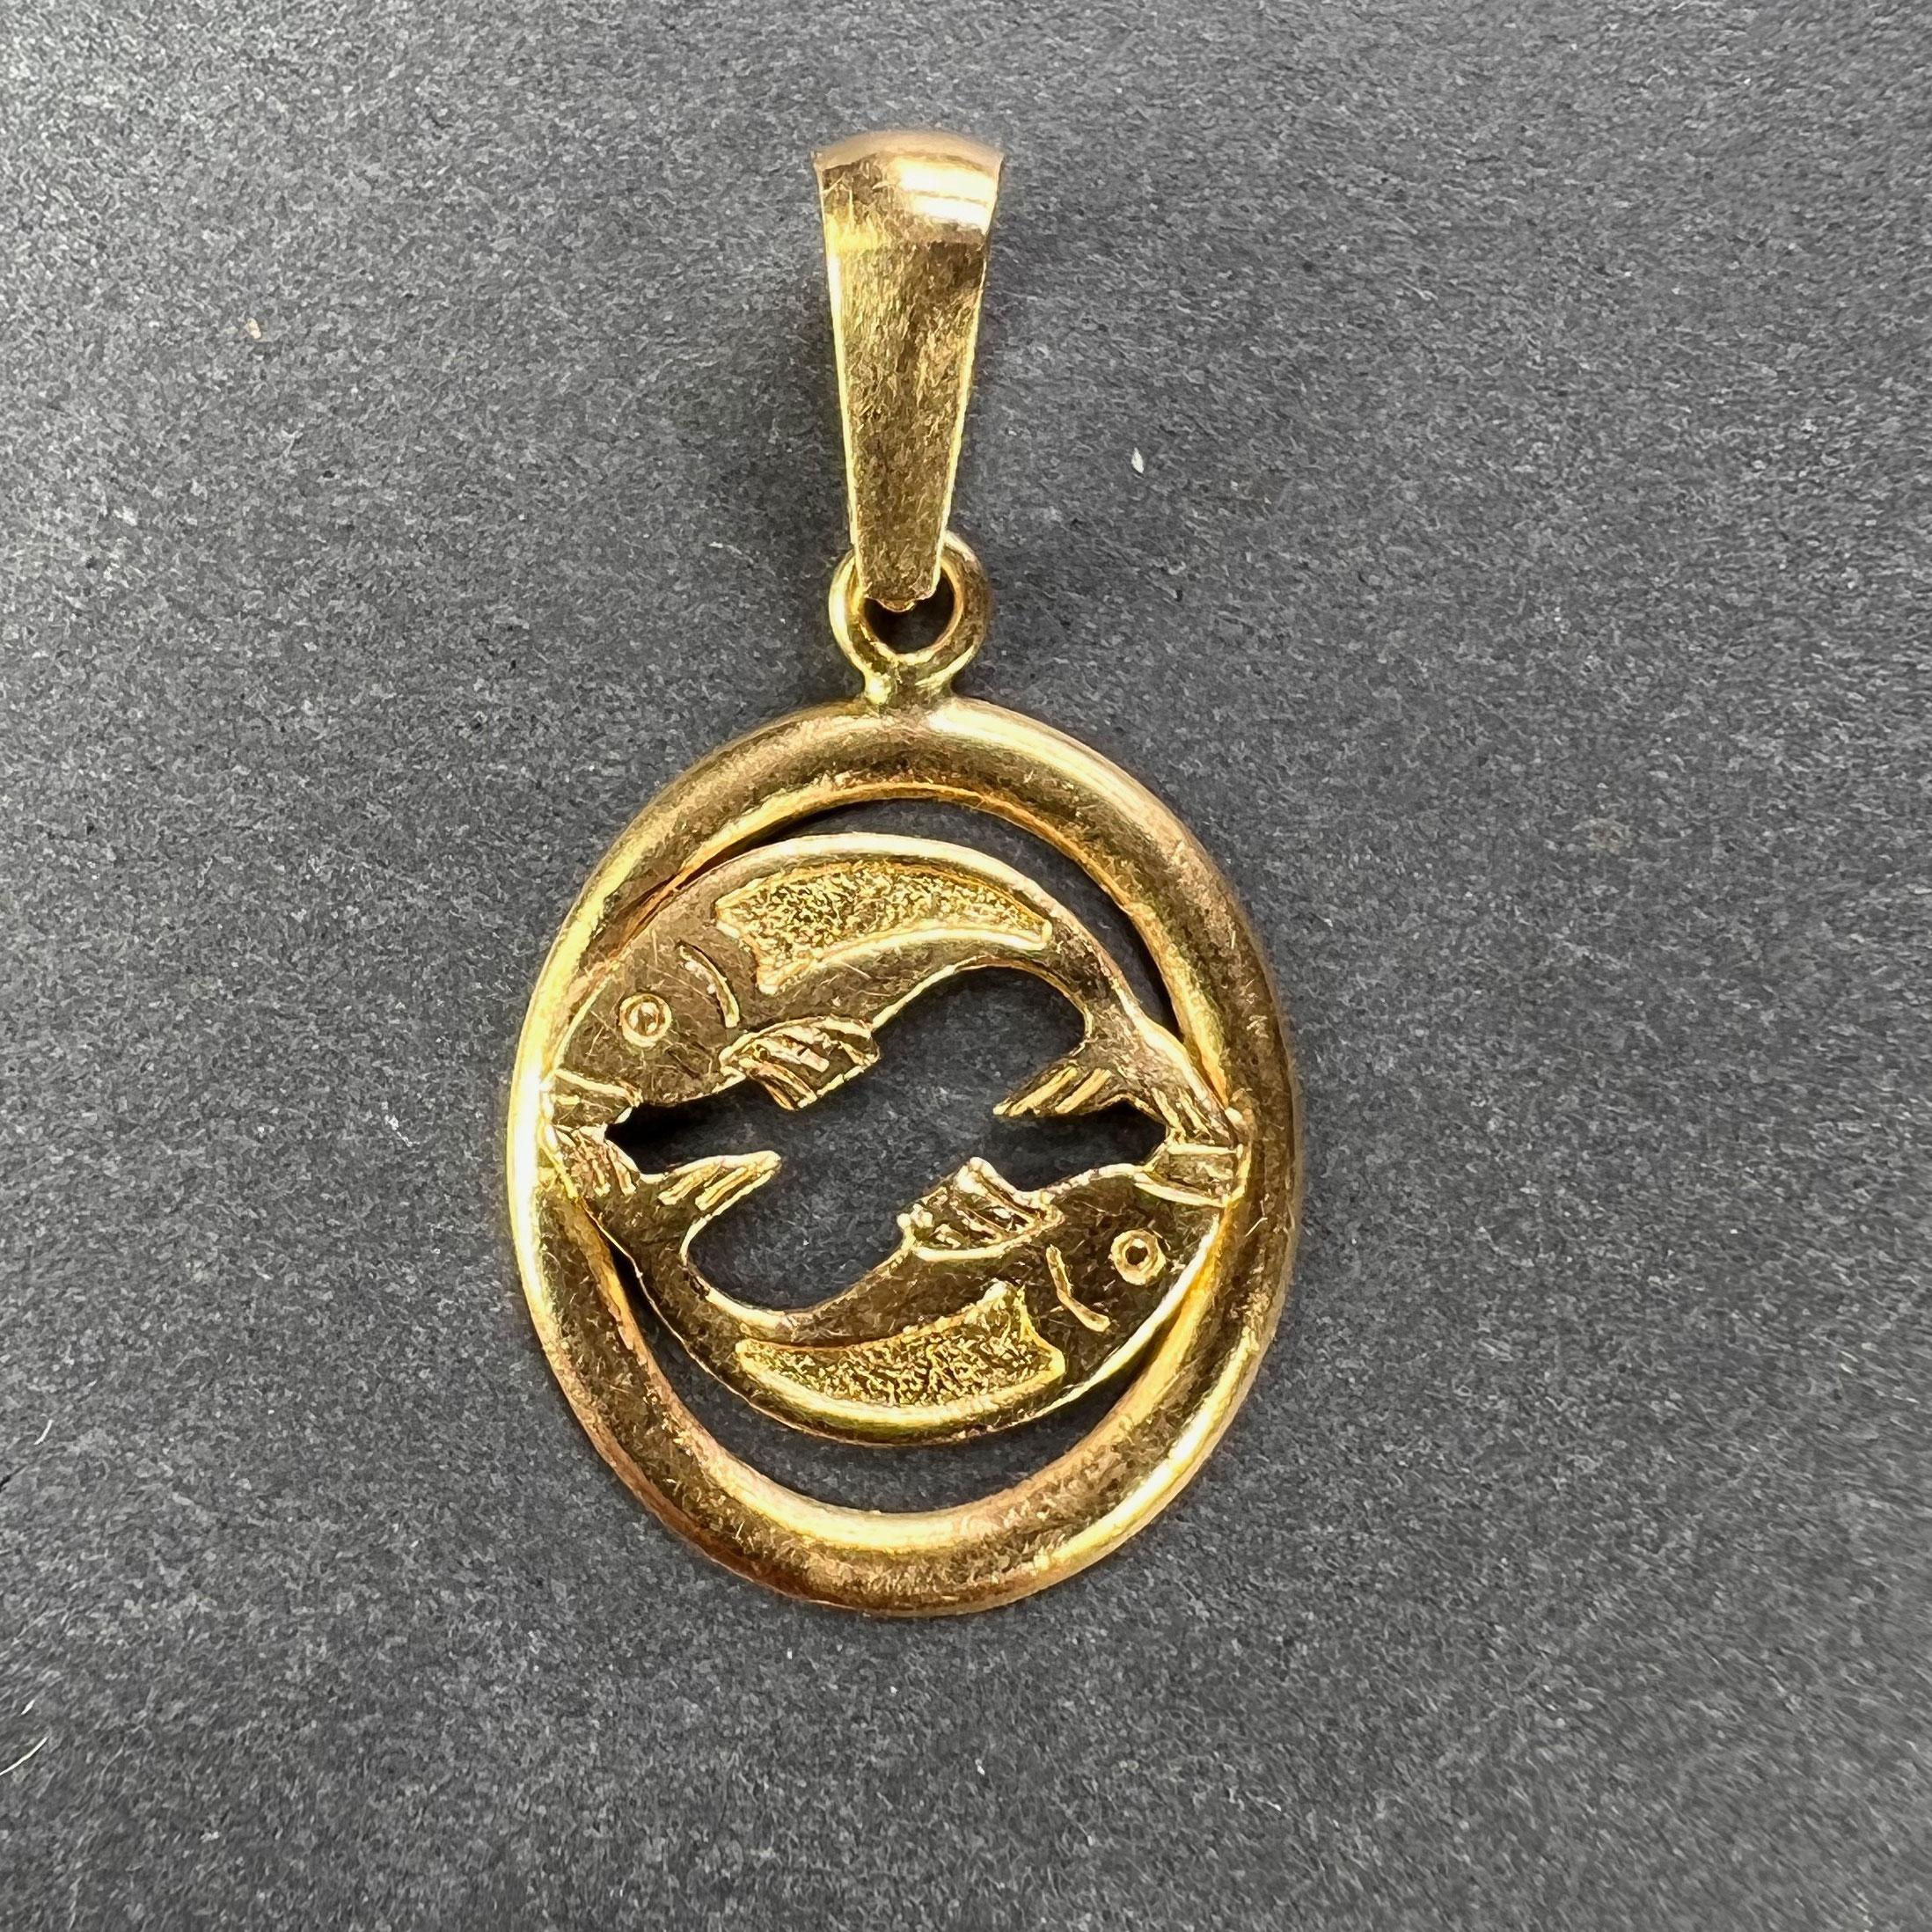 An 18 karat (18K) yellow gold charm pendant designed as the Zodiac sign of Pisces, depicting a pair of fish. Stamped with the eagle mark for 18 karat gold and French manufacture with an unknown makers mark.
 
Dimensions: 1.8 x 1.4 x 0.08 cm (not